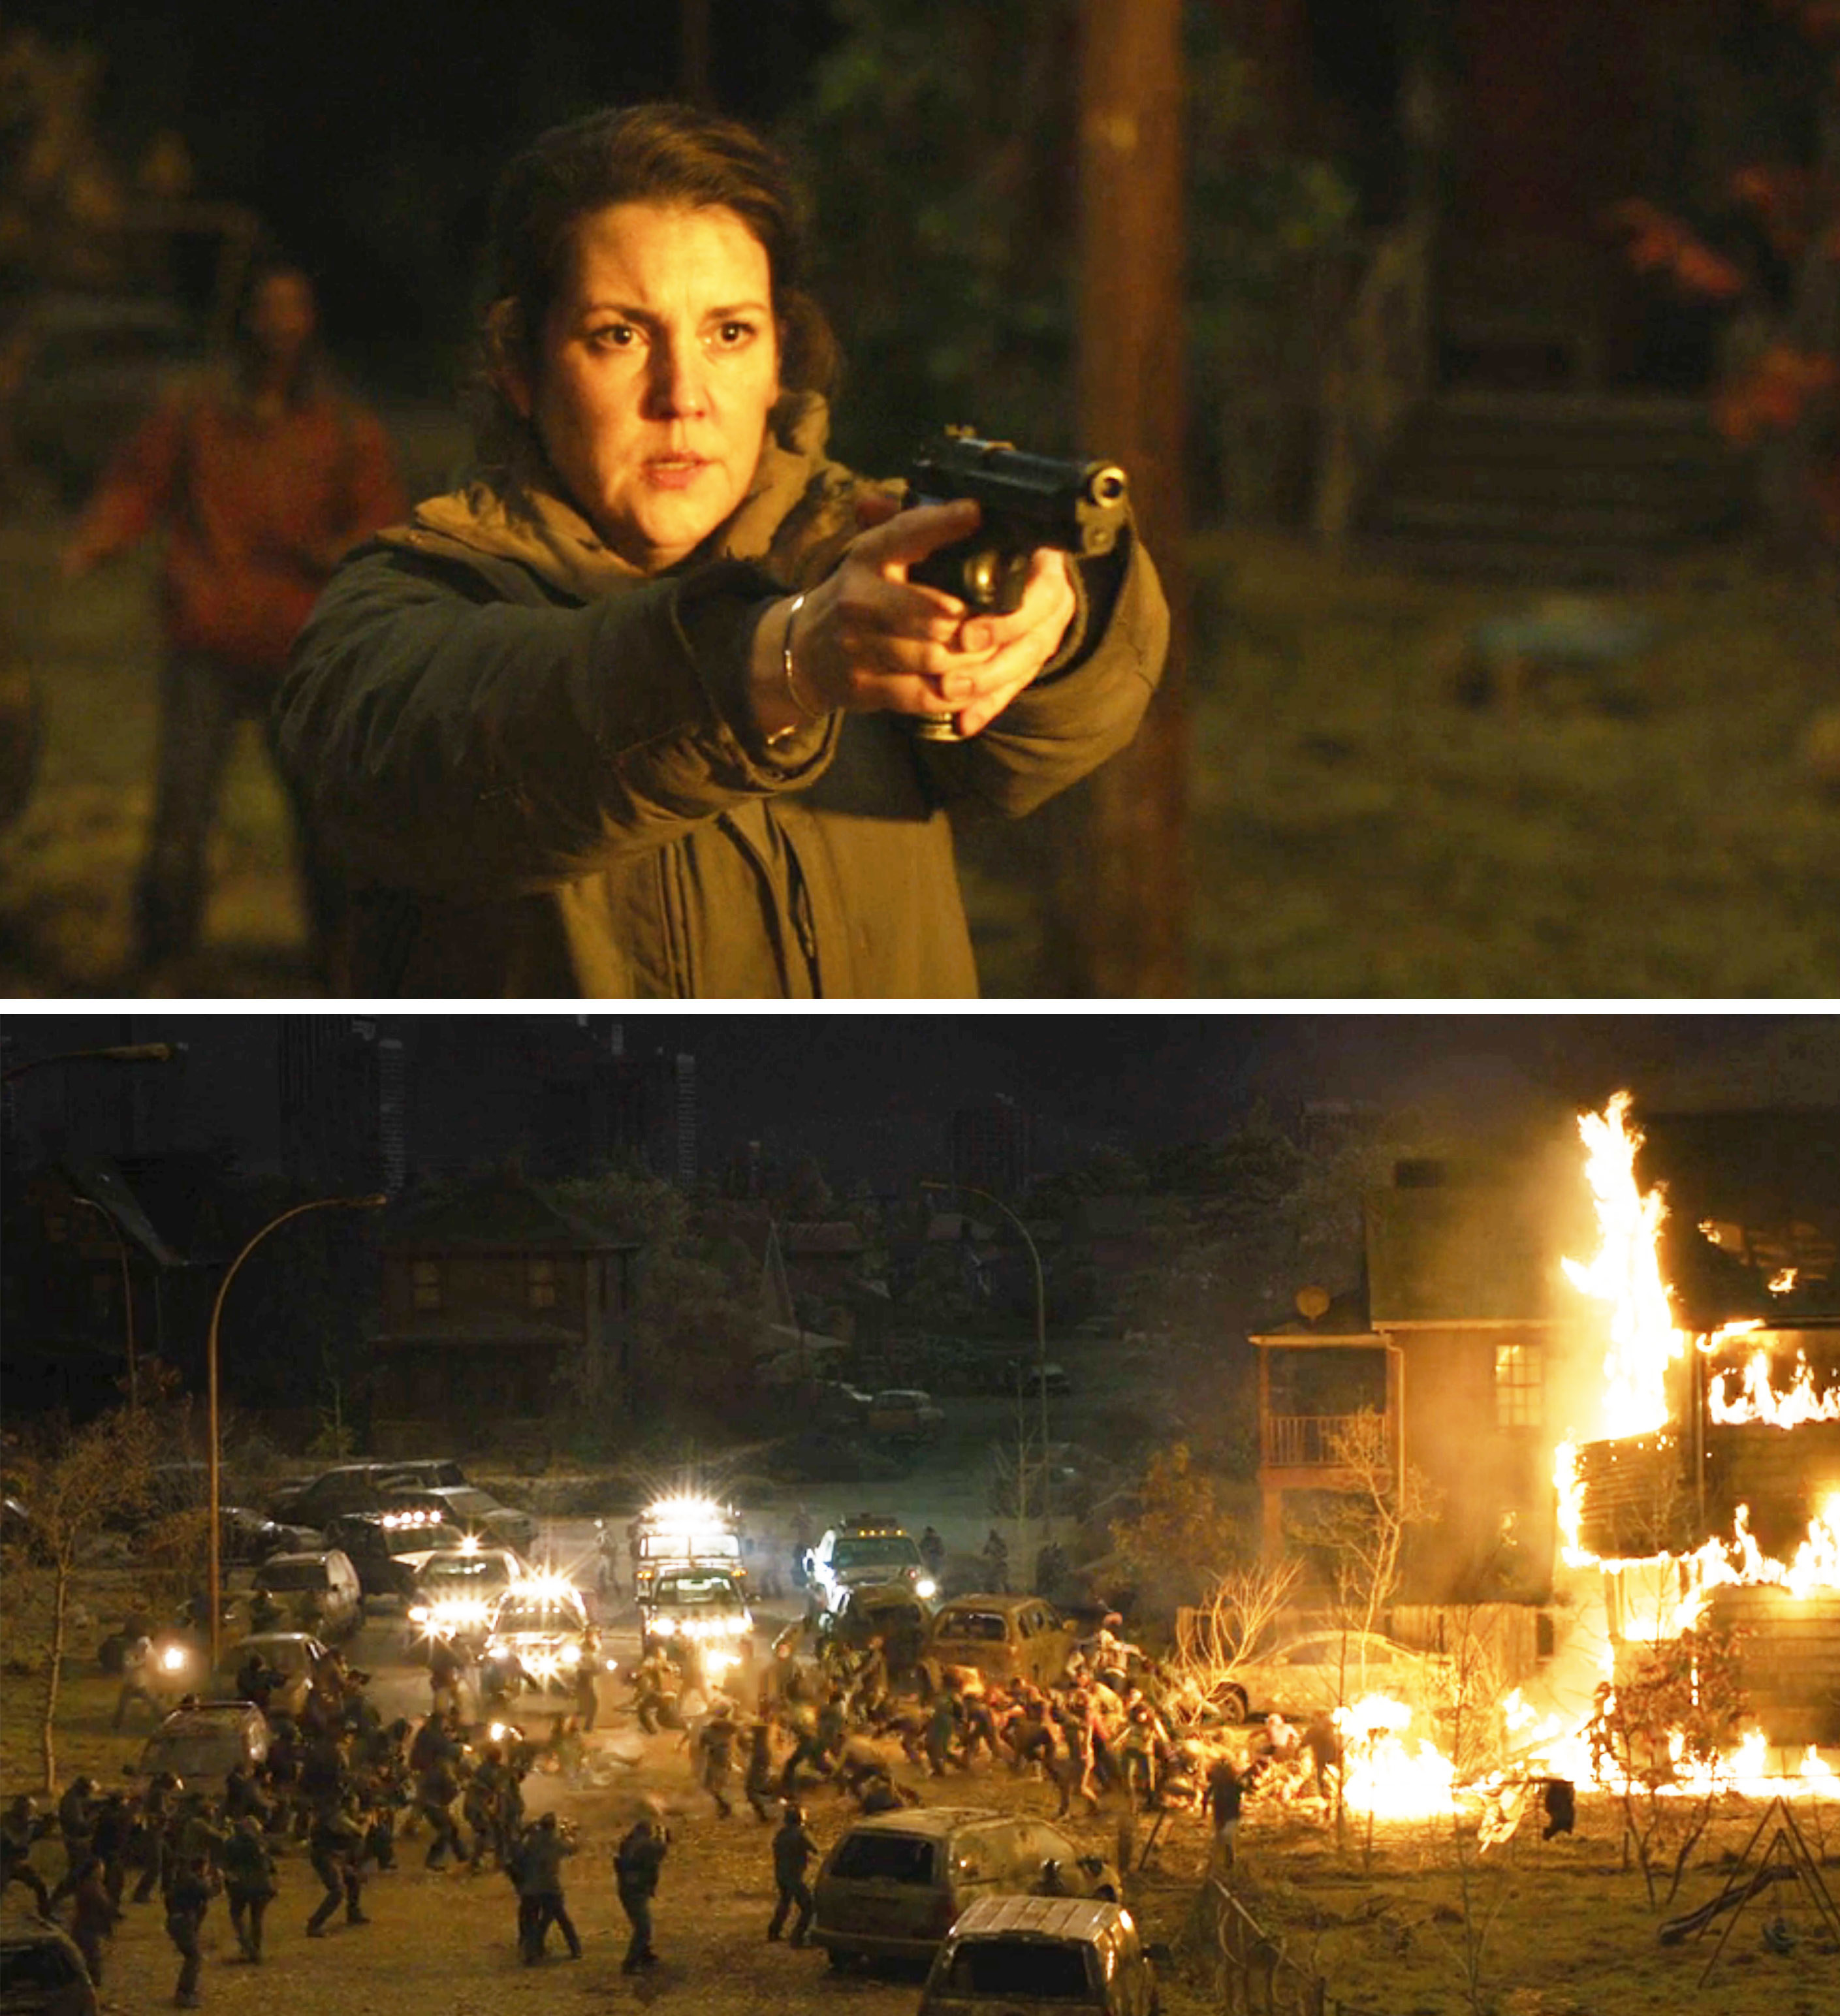 Kathleen holding up a gun amid a scene of chaos and flames